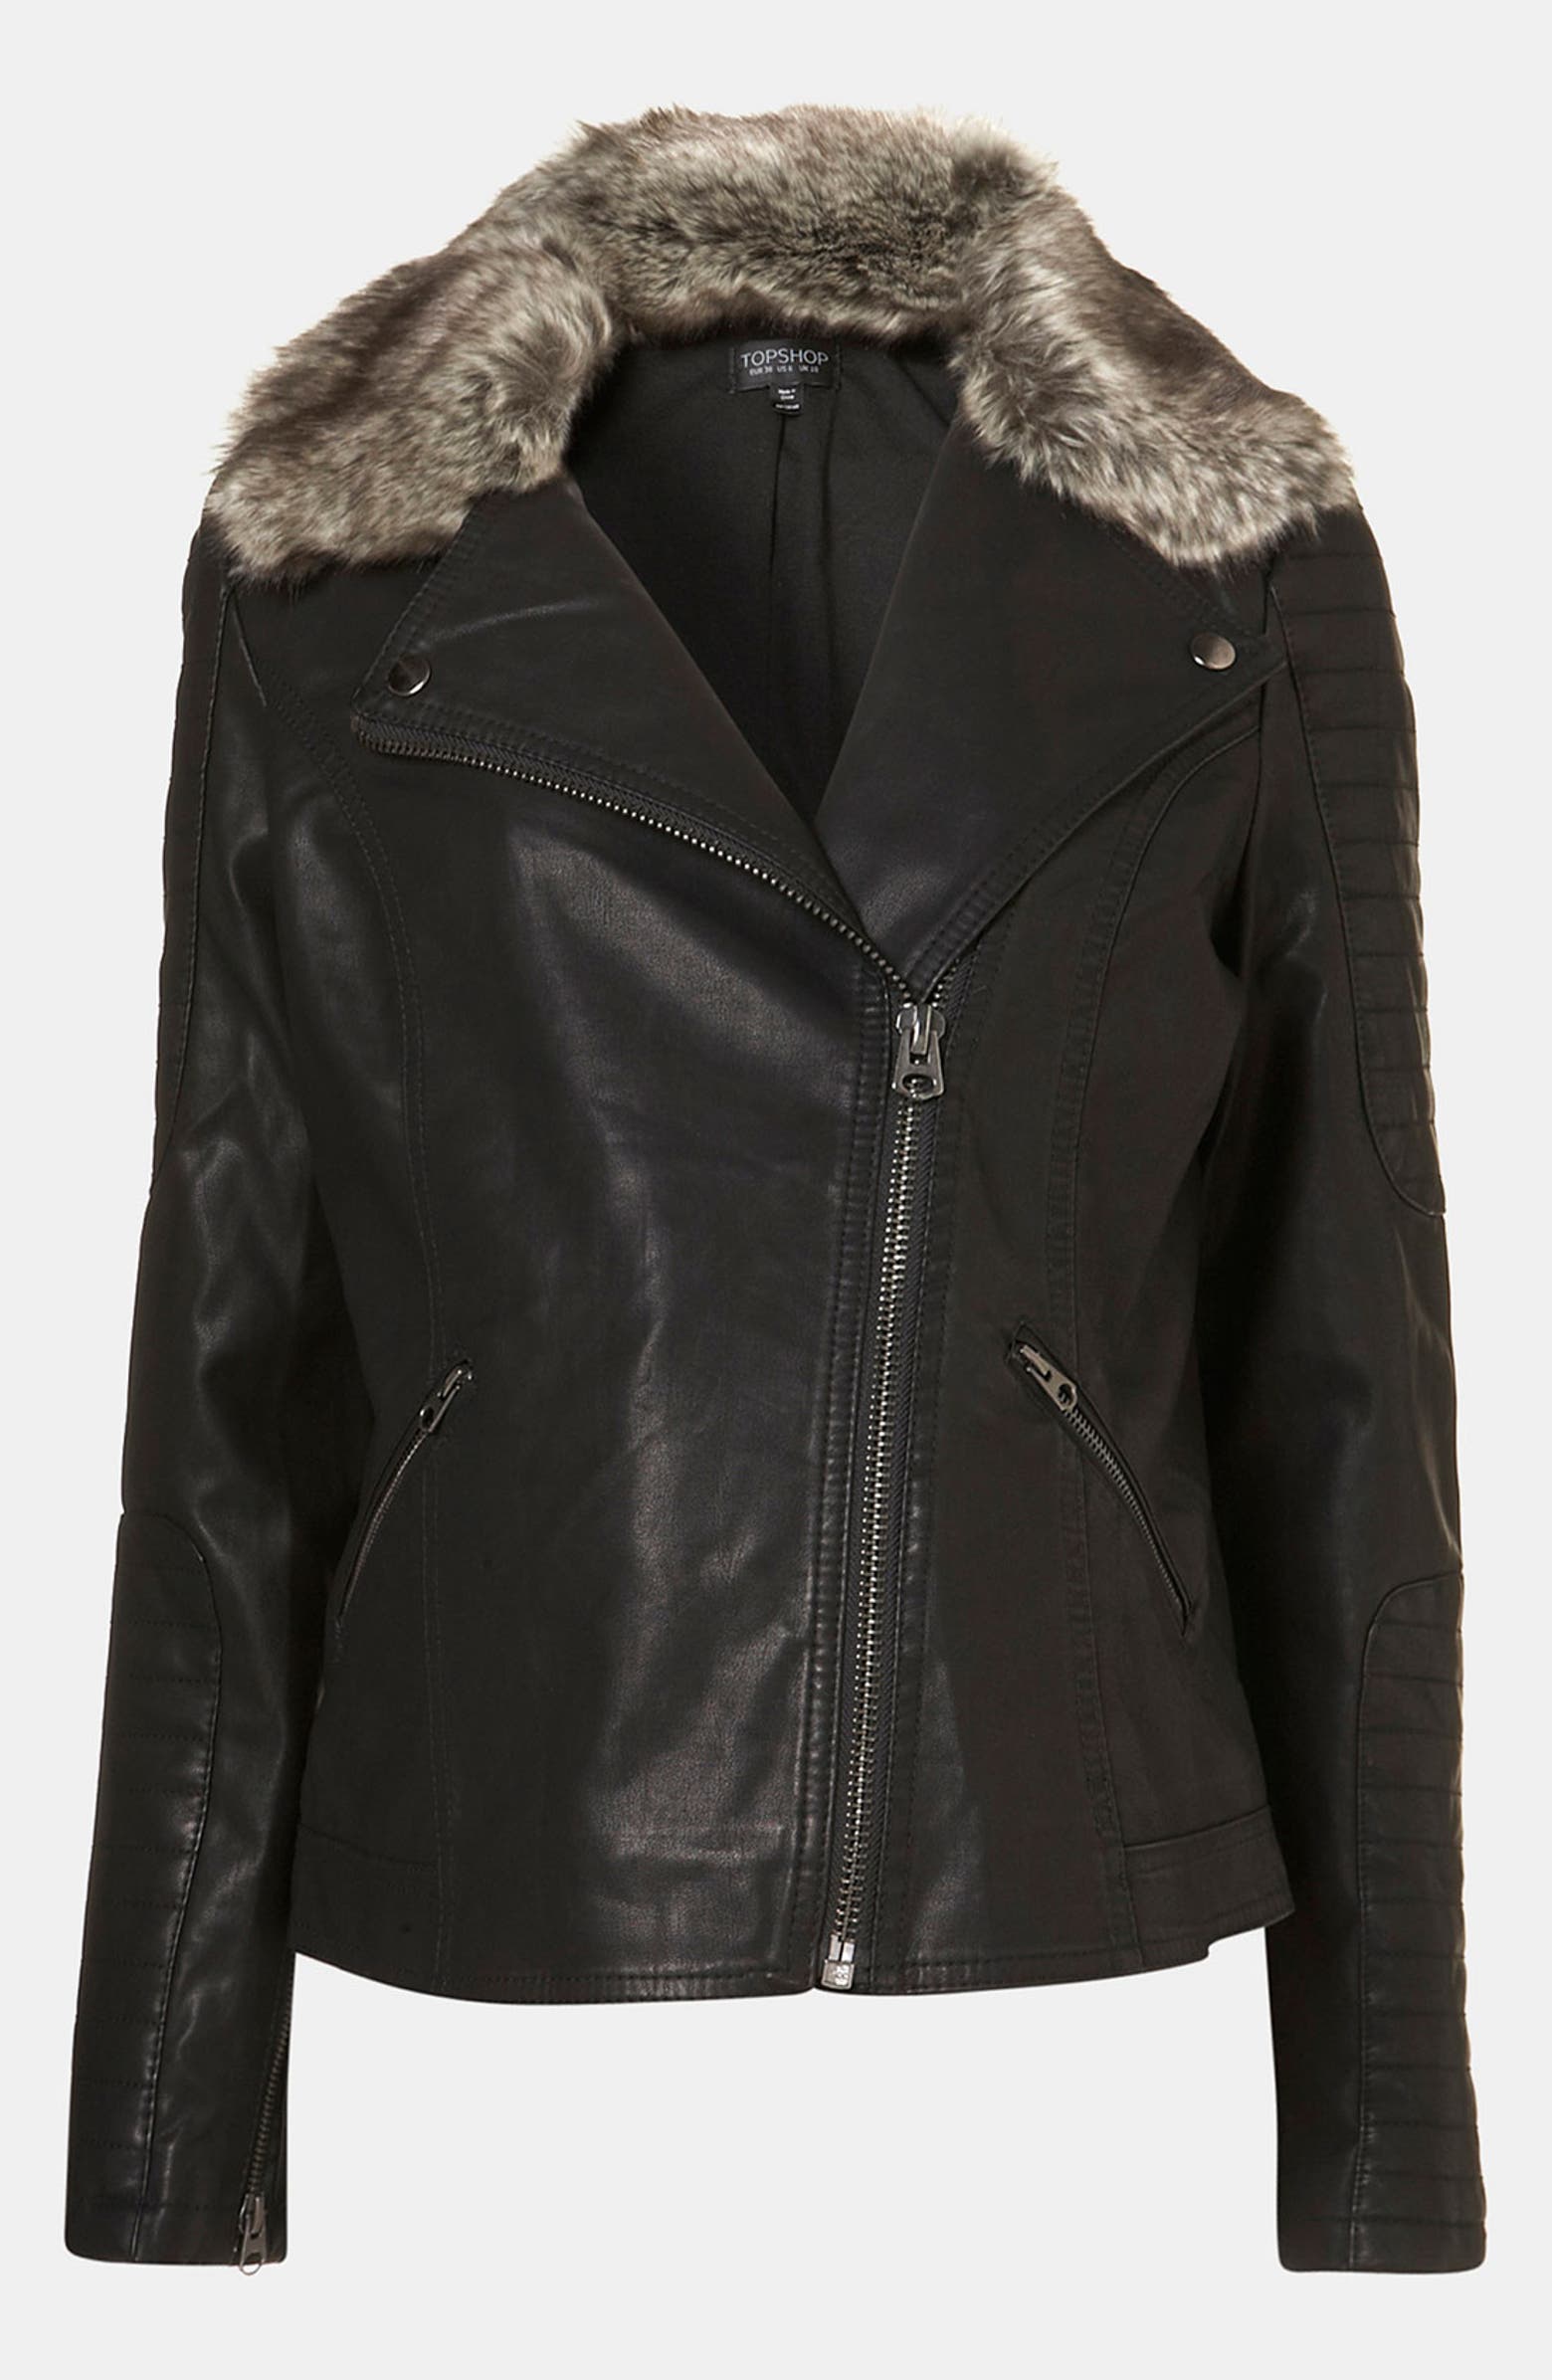 Topshop 'Maddox' Faux Leather Maternity Jacket | Nordstrom